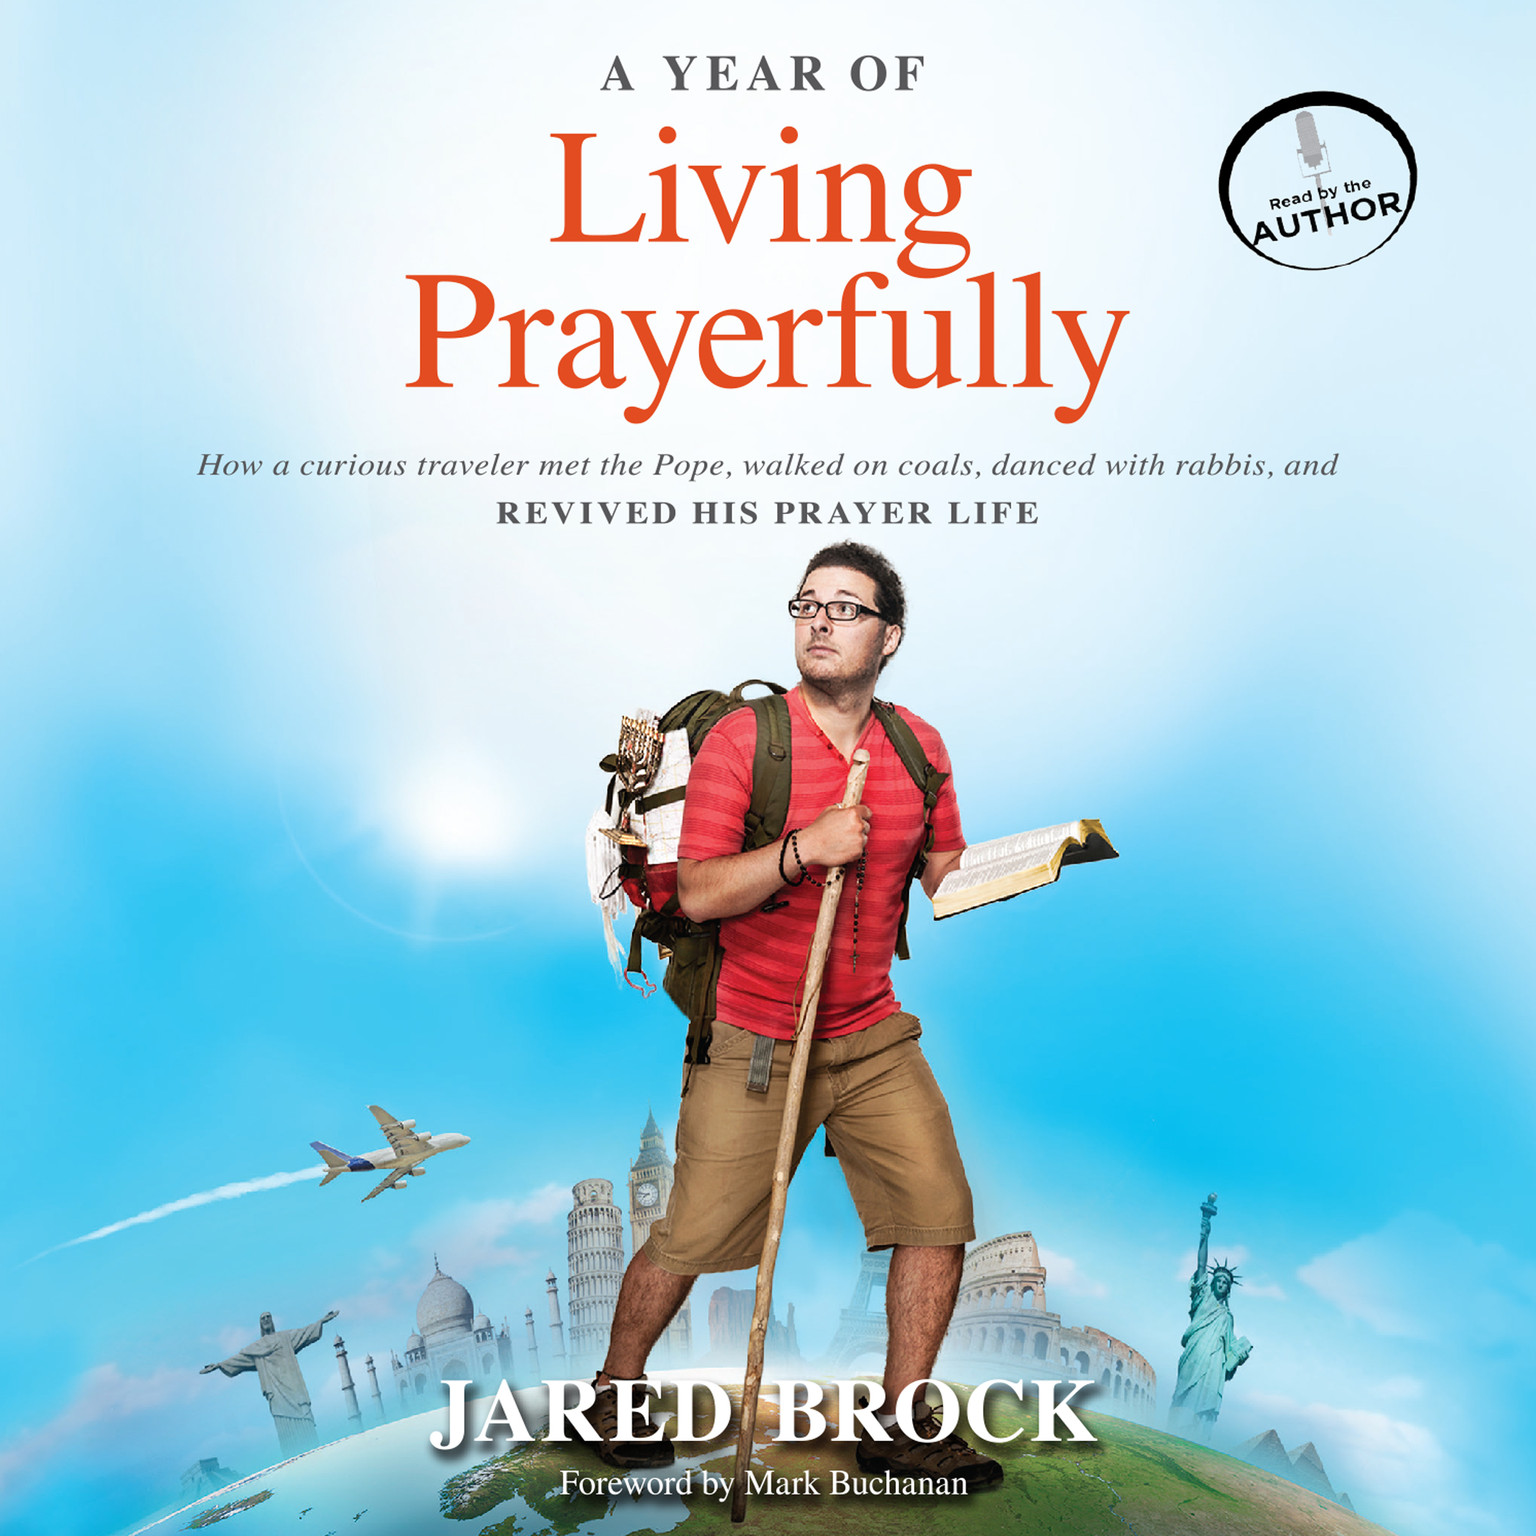 A Year of Living Prayerfully: How a Curious Traveler Met the Pope, Walked on Coals, Danced with Rabbis, and Revived His Prayer Life Audiobook, by Jared Brock